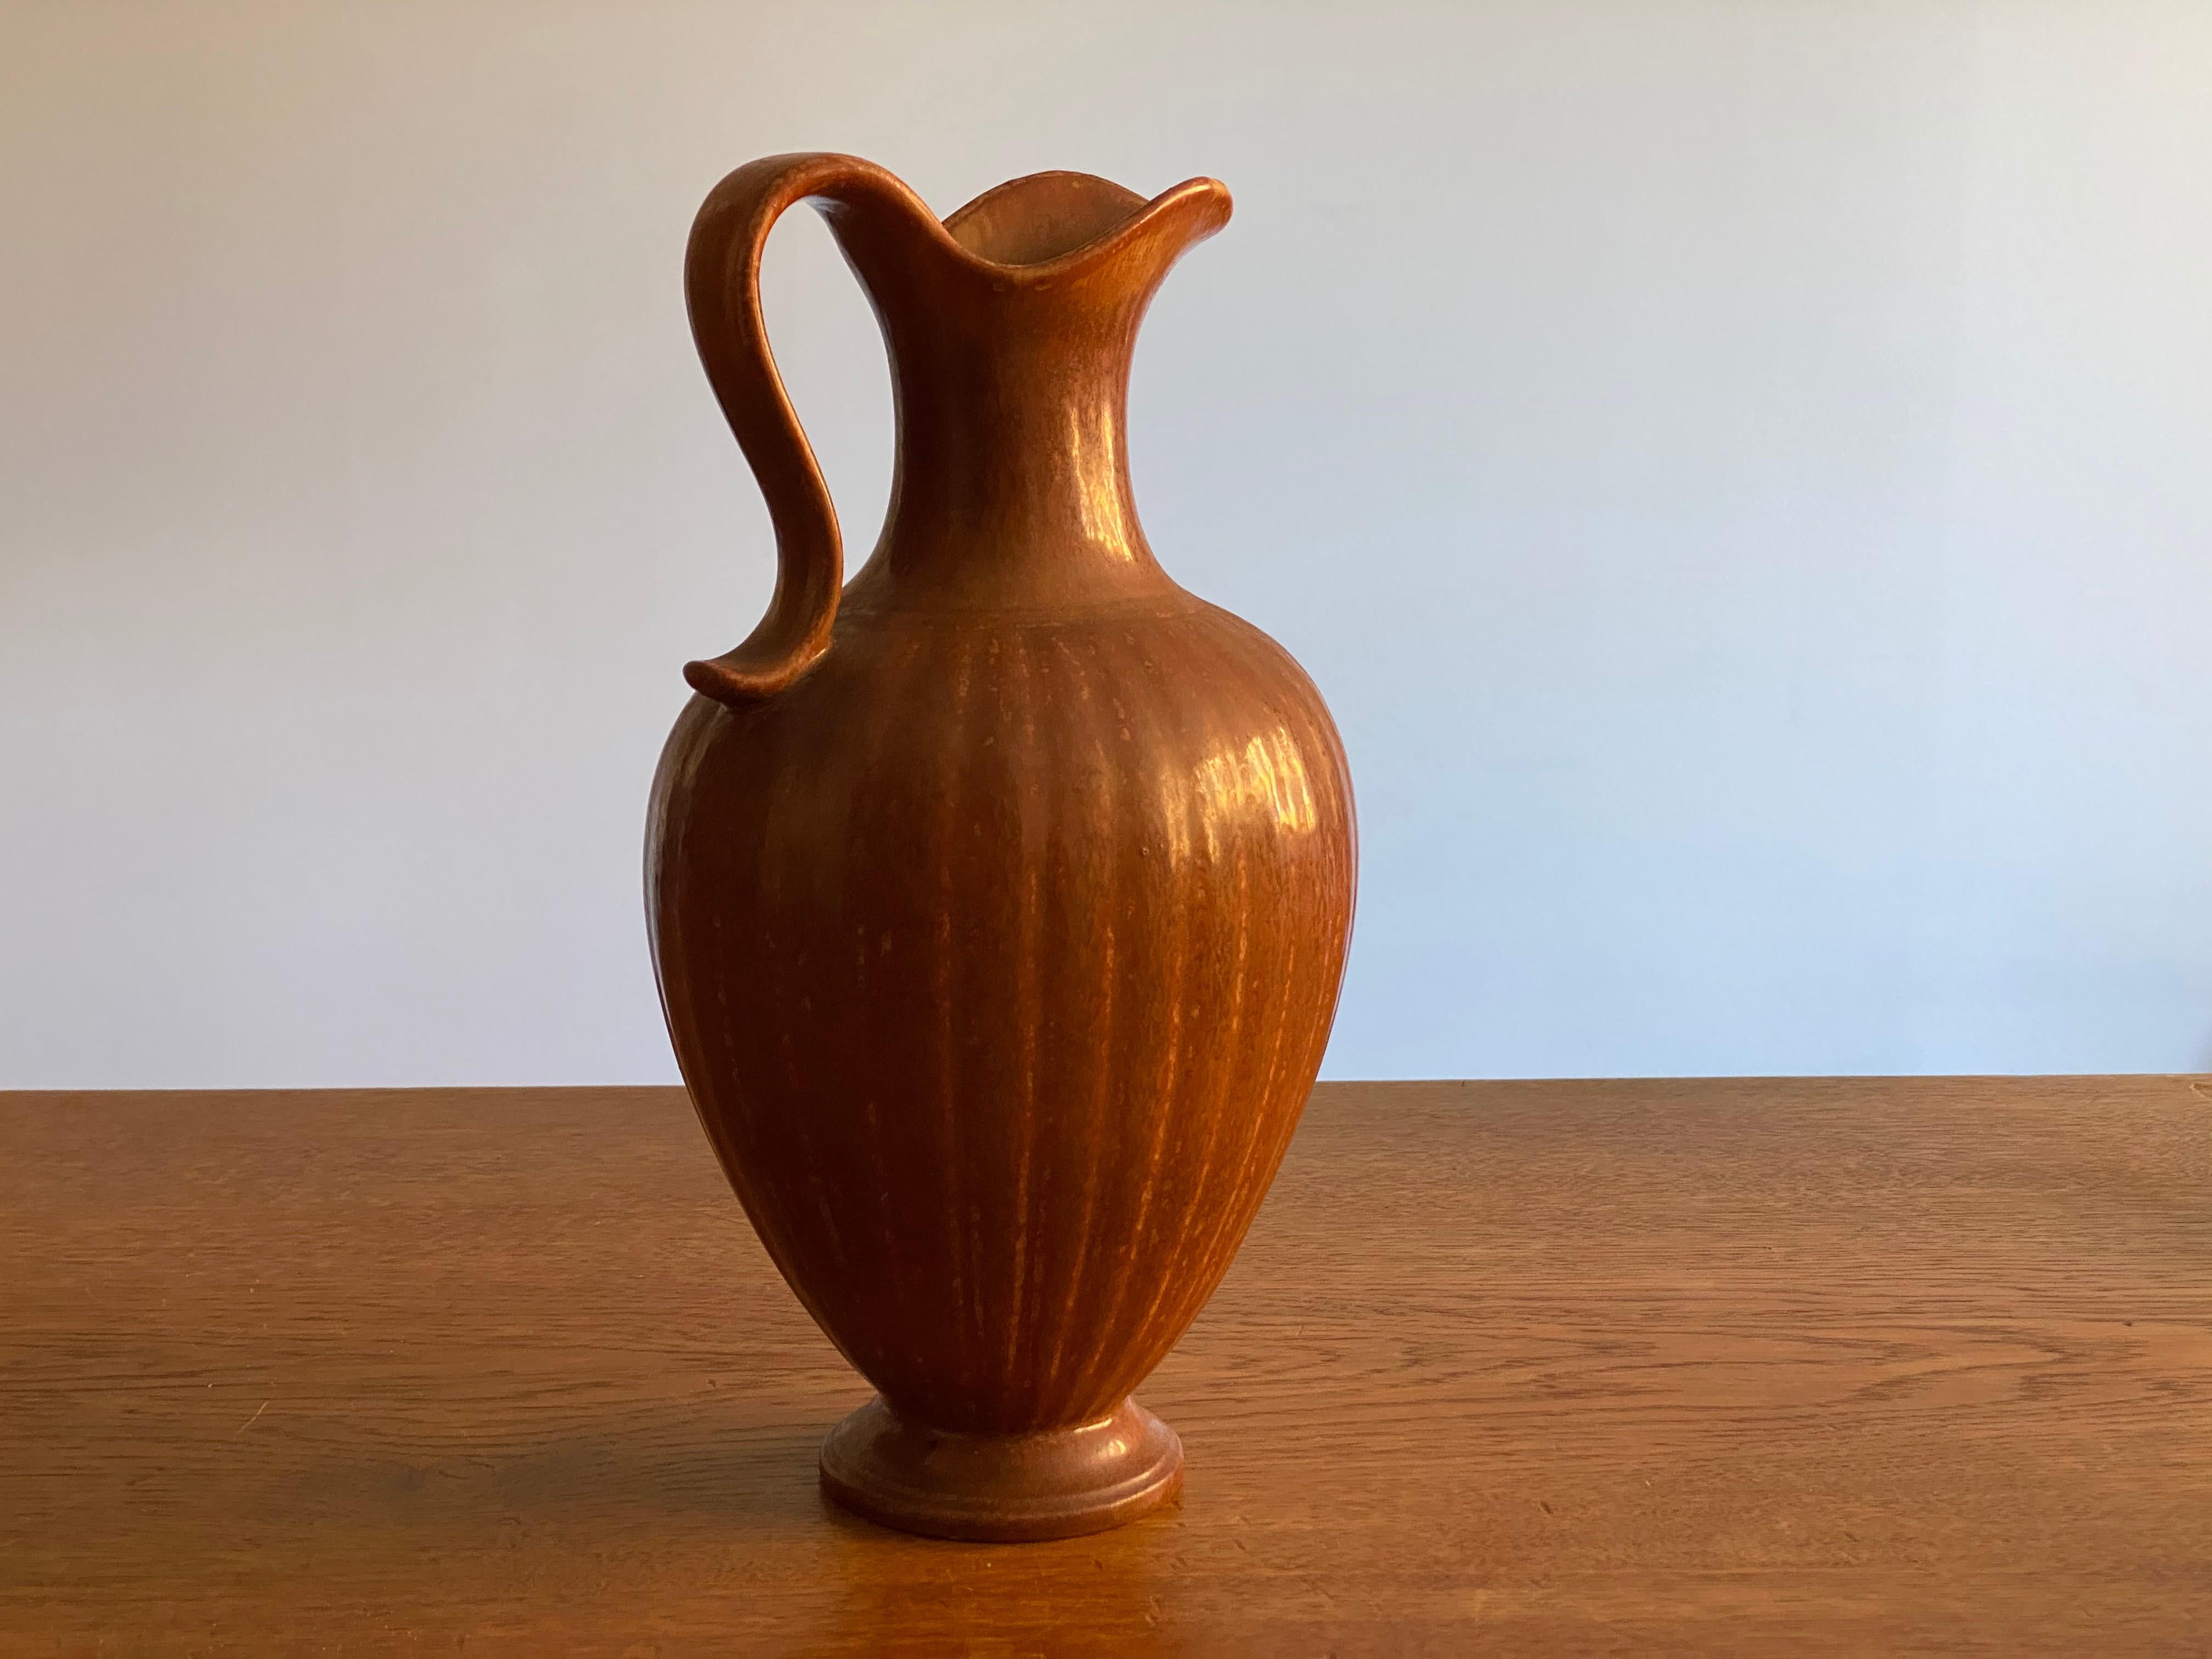 A sizable stoneware pitcher produced by Rörstrands, Sweden, 1940s. Designed and signed by Gunnar Nylund, (Swedish, 1914-1997).

Nylund served as artistic director at Rörstrands, where he worked 1931-1955. Prior to his work at Rörstrand he was a